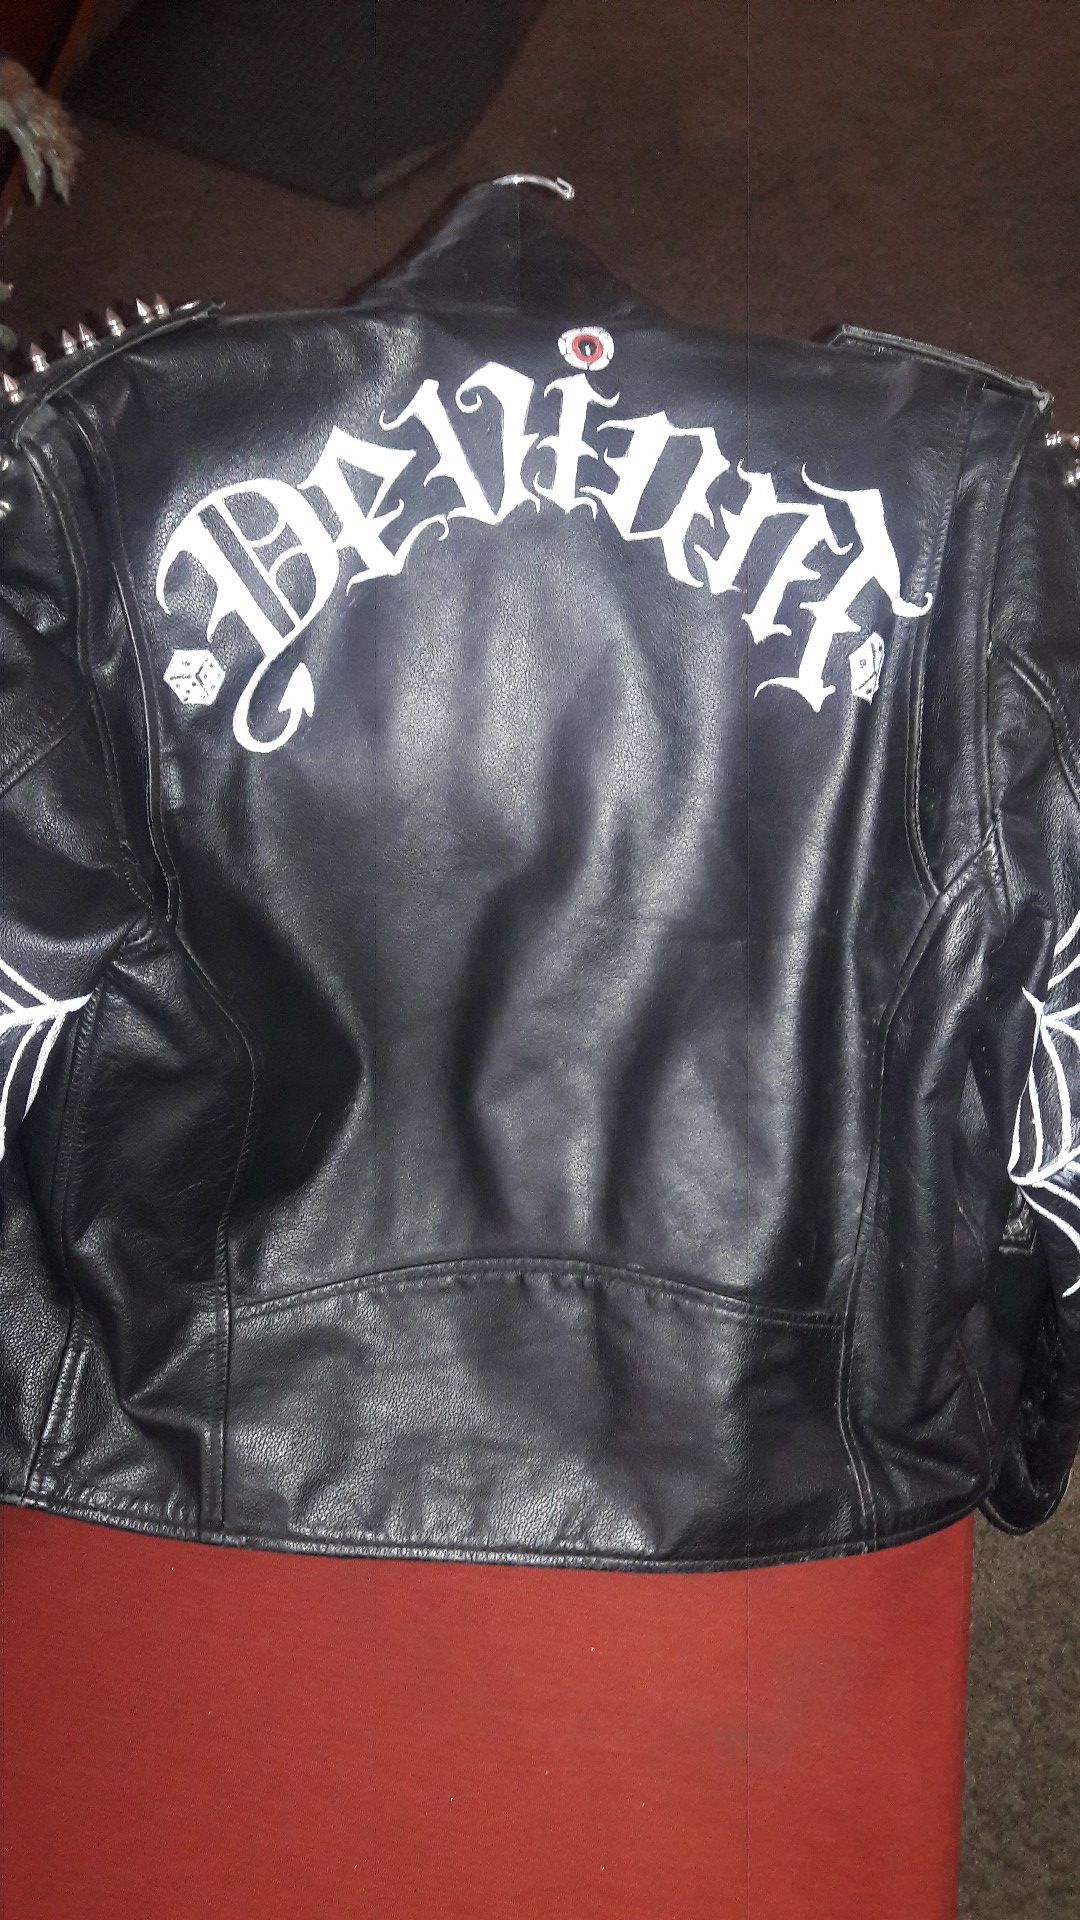 Studded black leather Jacket with the words "Deviant" on the back